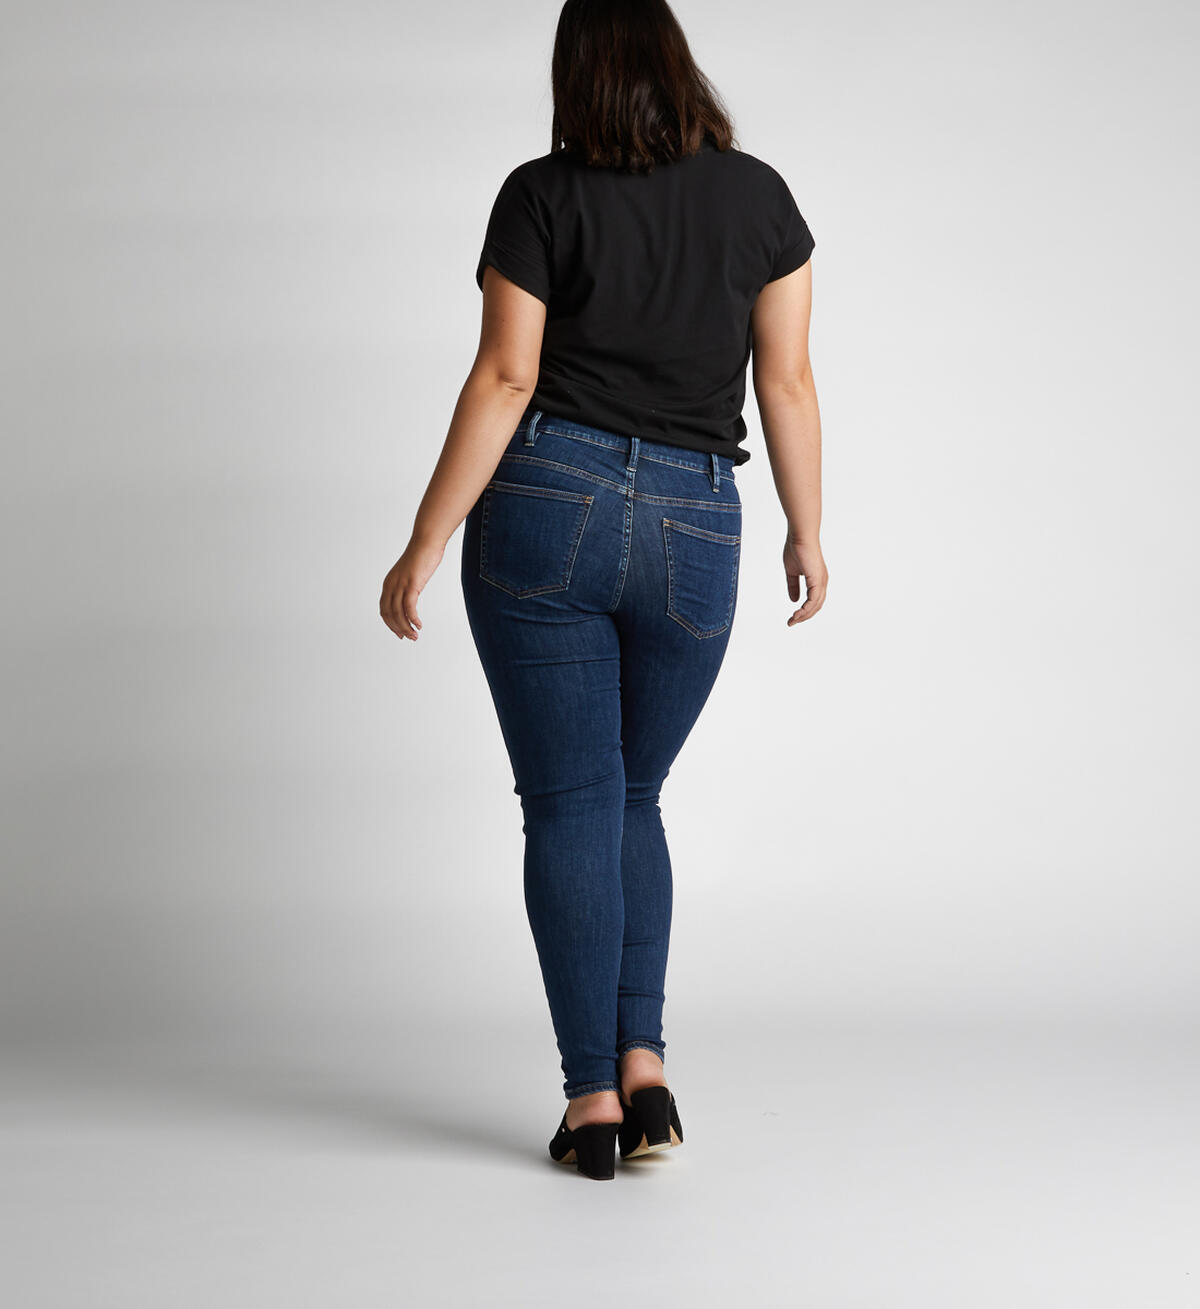 Avery High-Rise Curvy Skinny Jeans, , hi-res image number 1